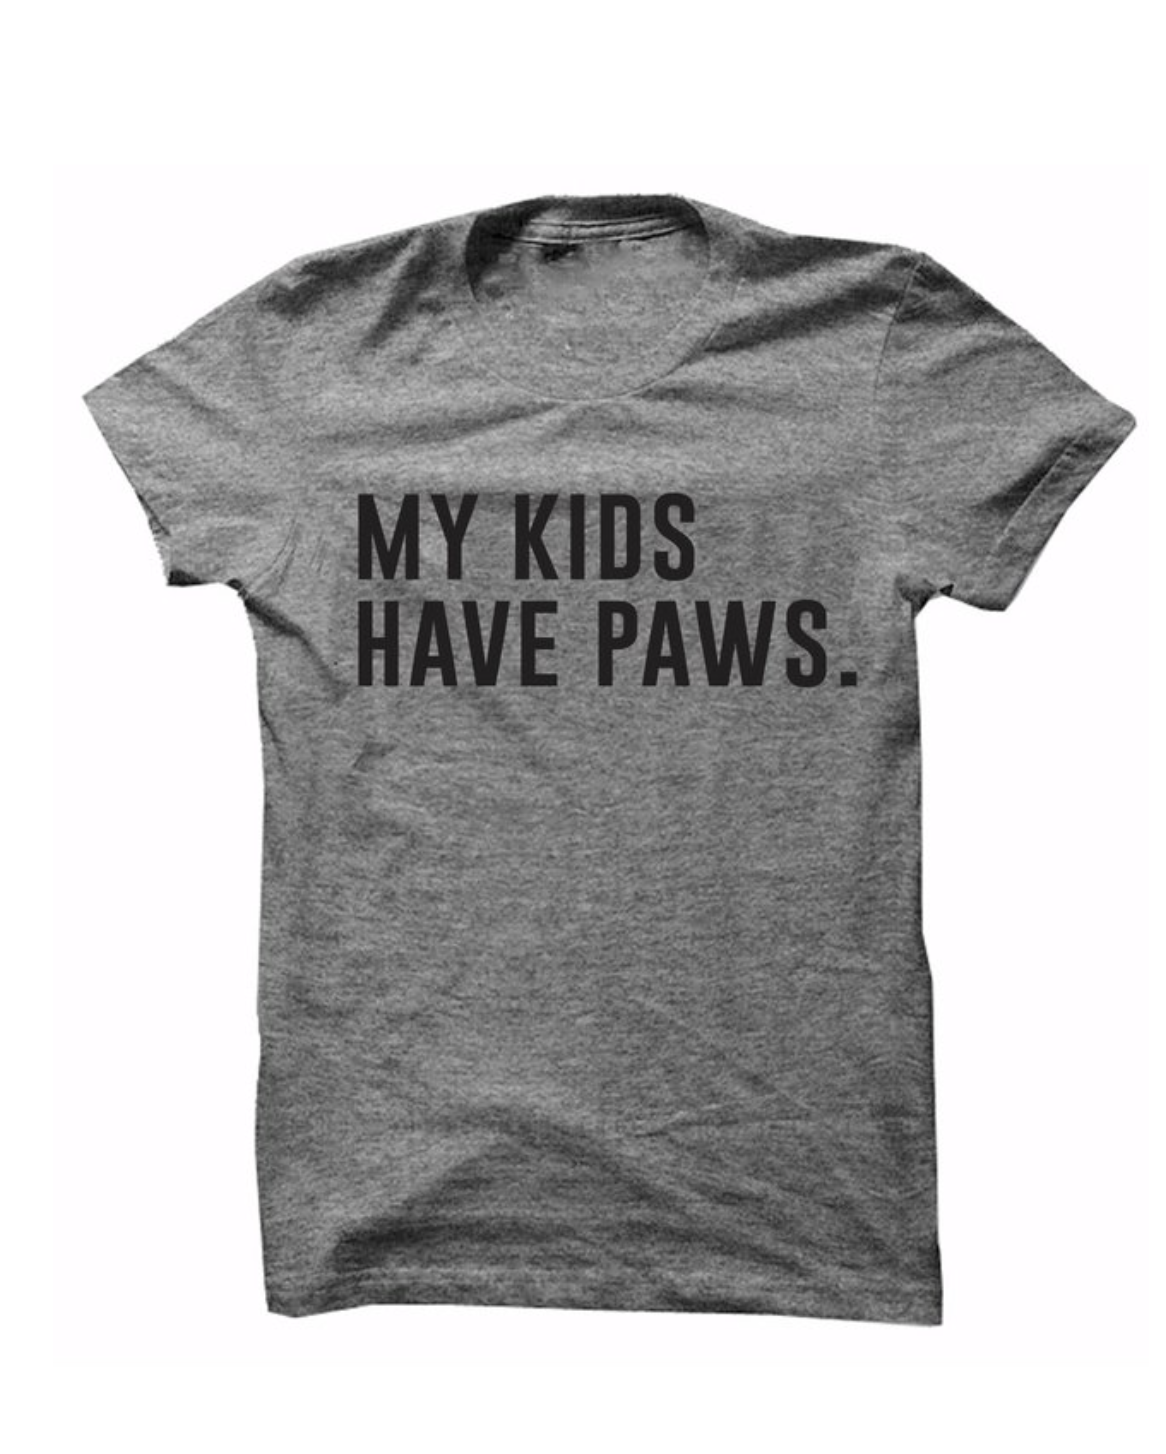 my kids have paws graphic tee from ily